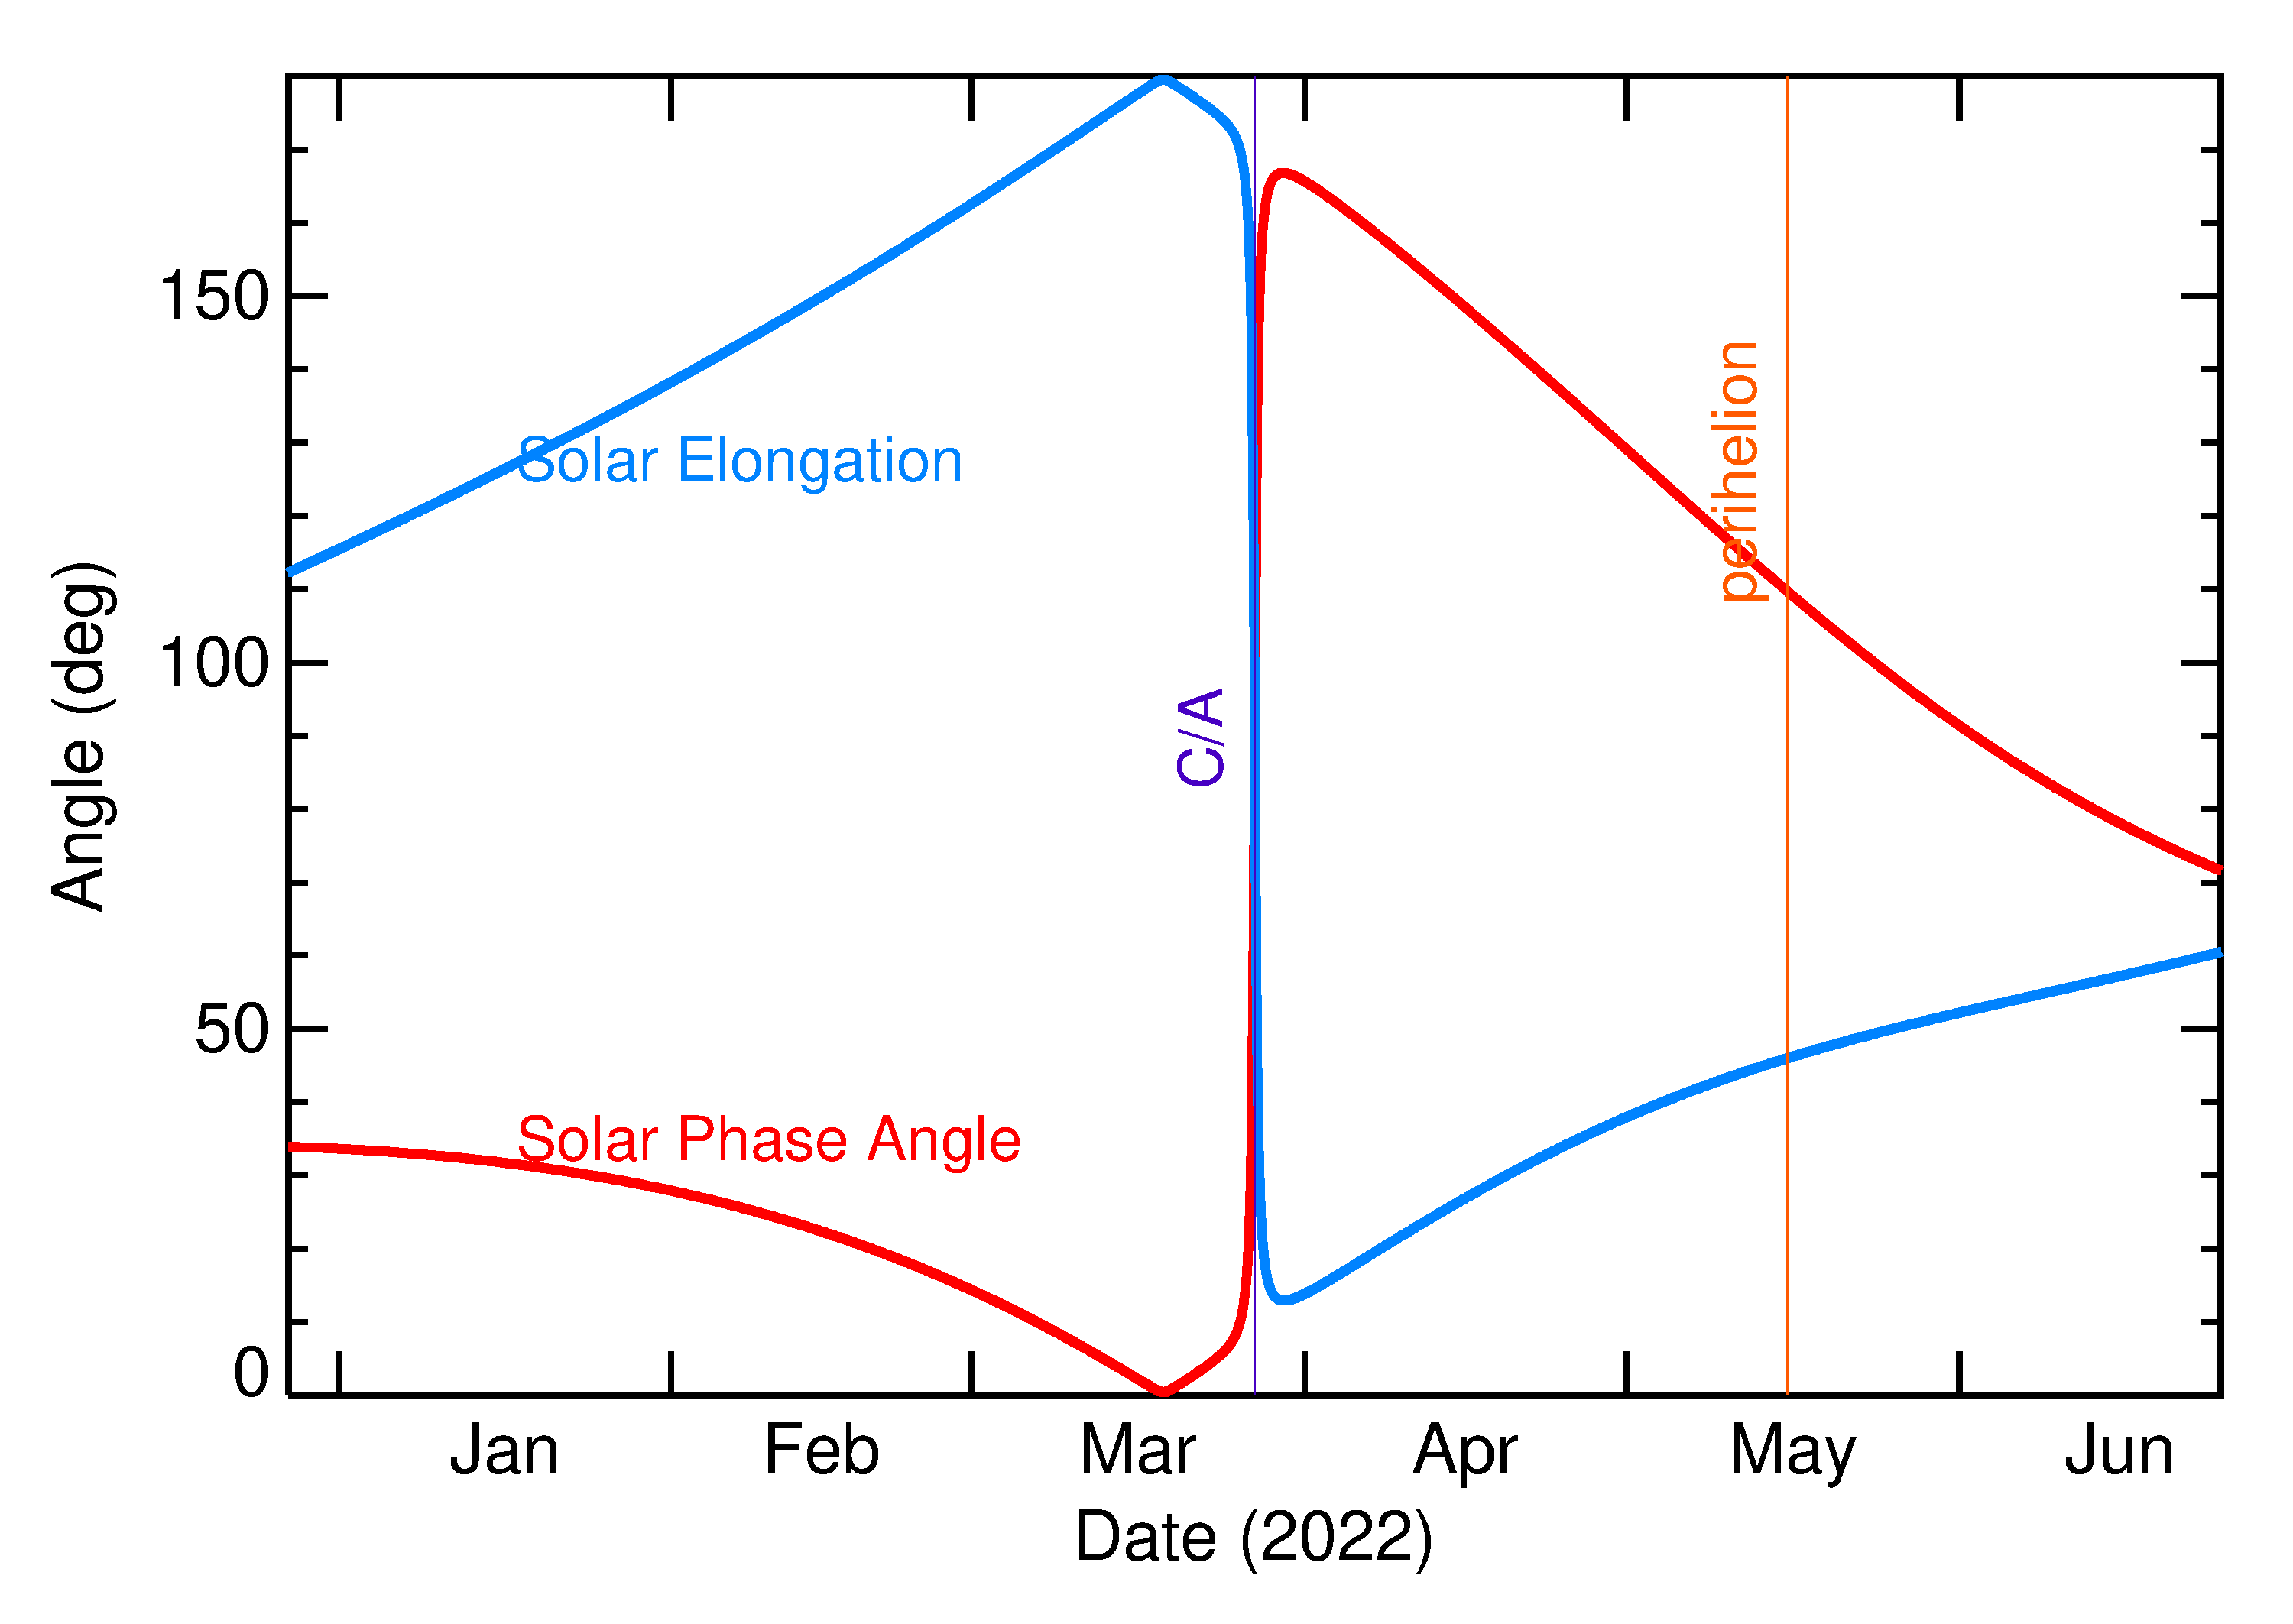 Solar Elongation and Solar Phase Angle of 2022 FA1 in the months around closest approach